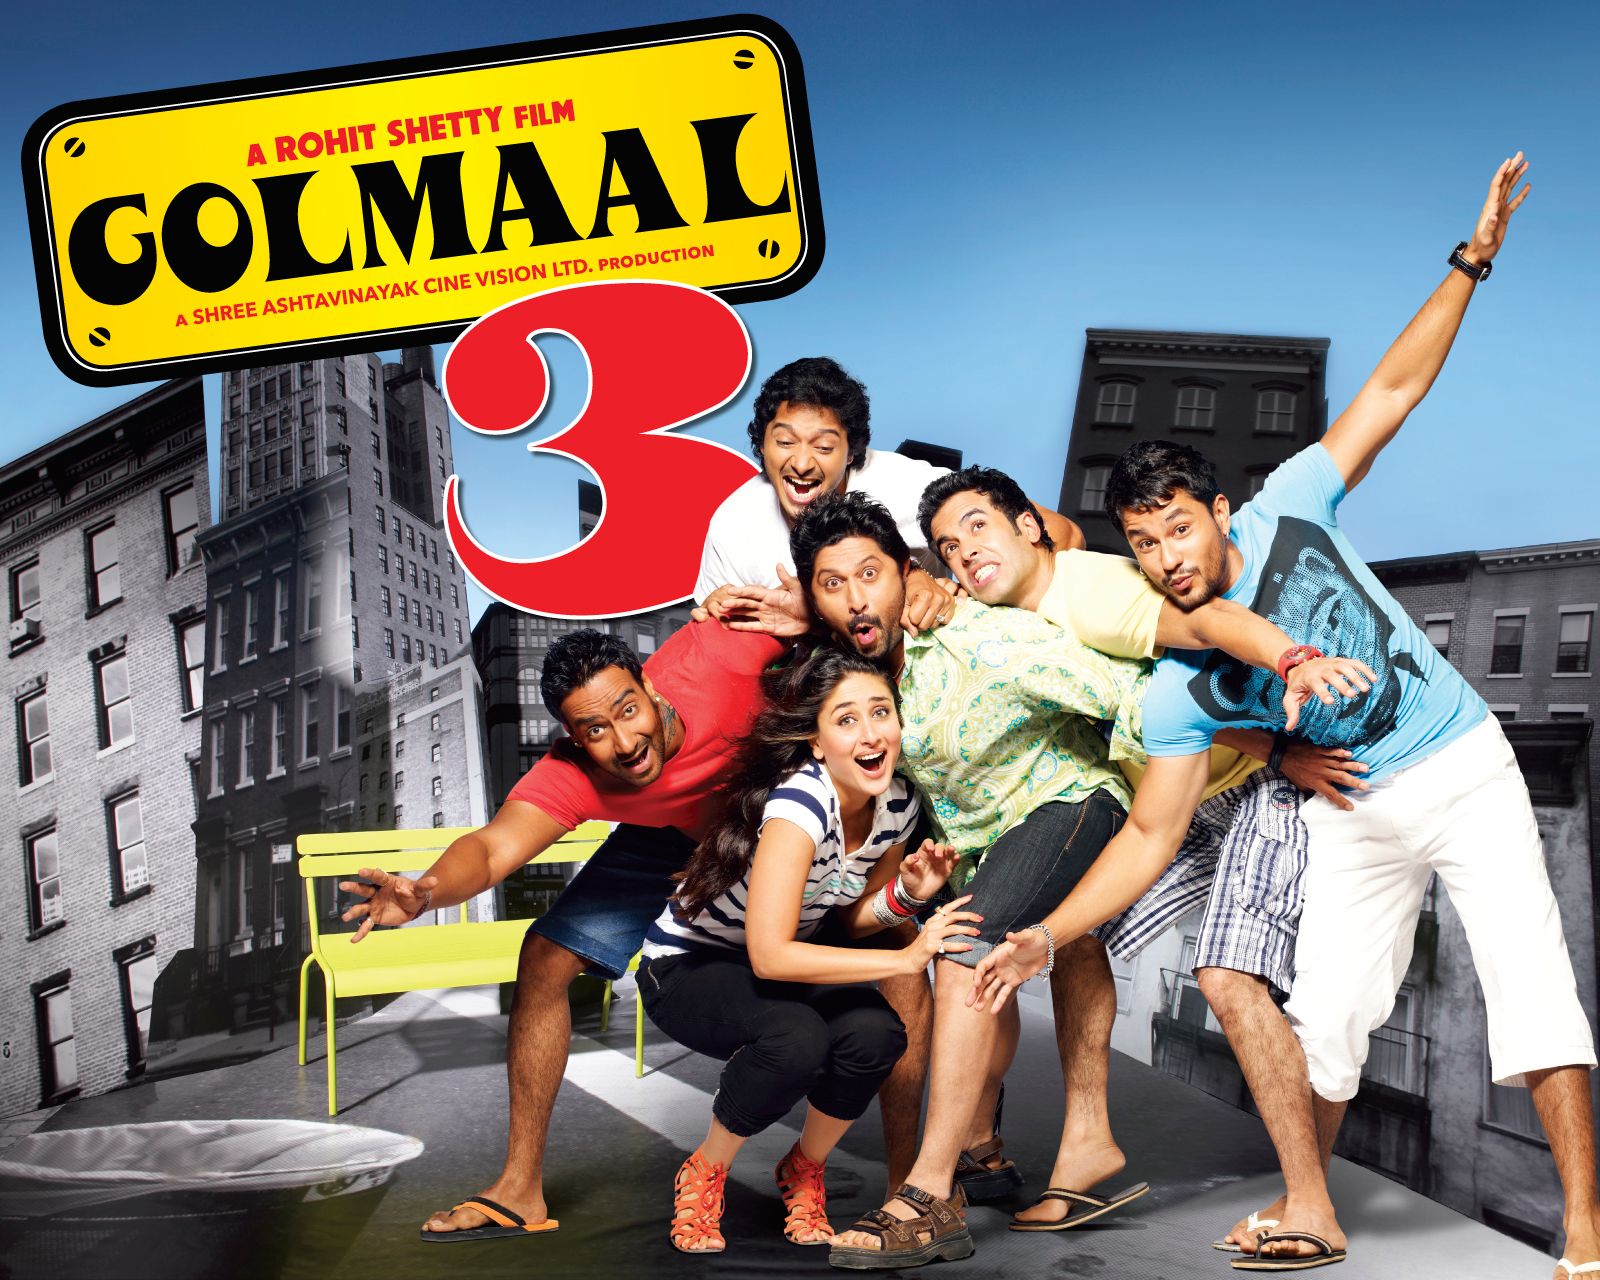 Golmaal 3 movie poster |photo courtesy moviesfromindia.in